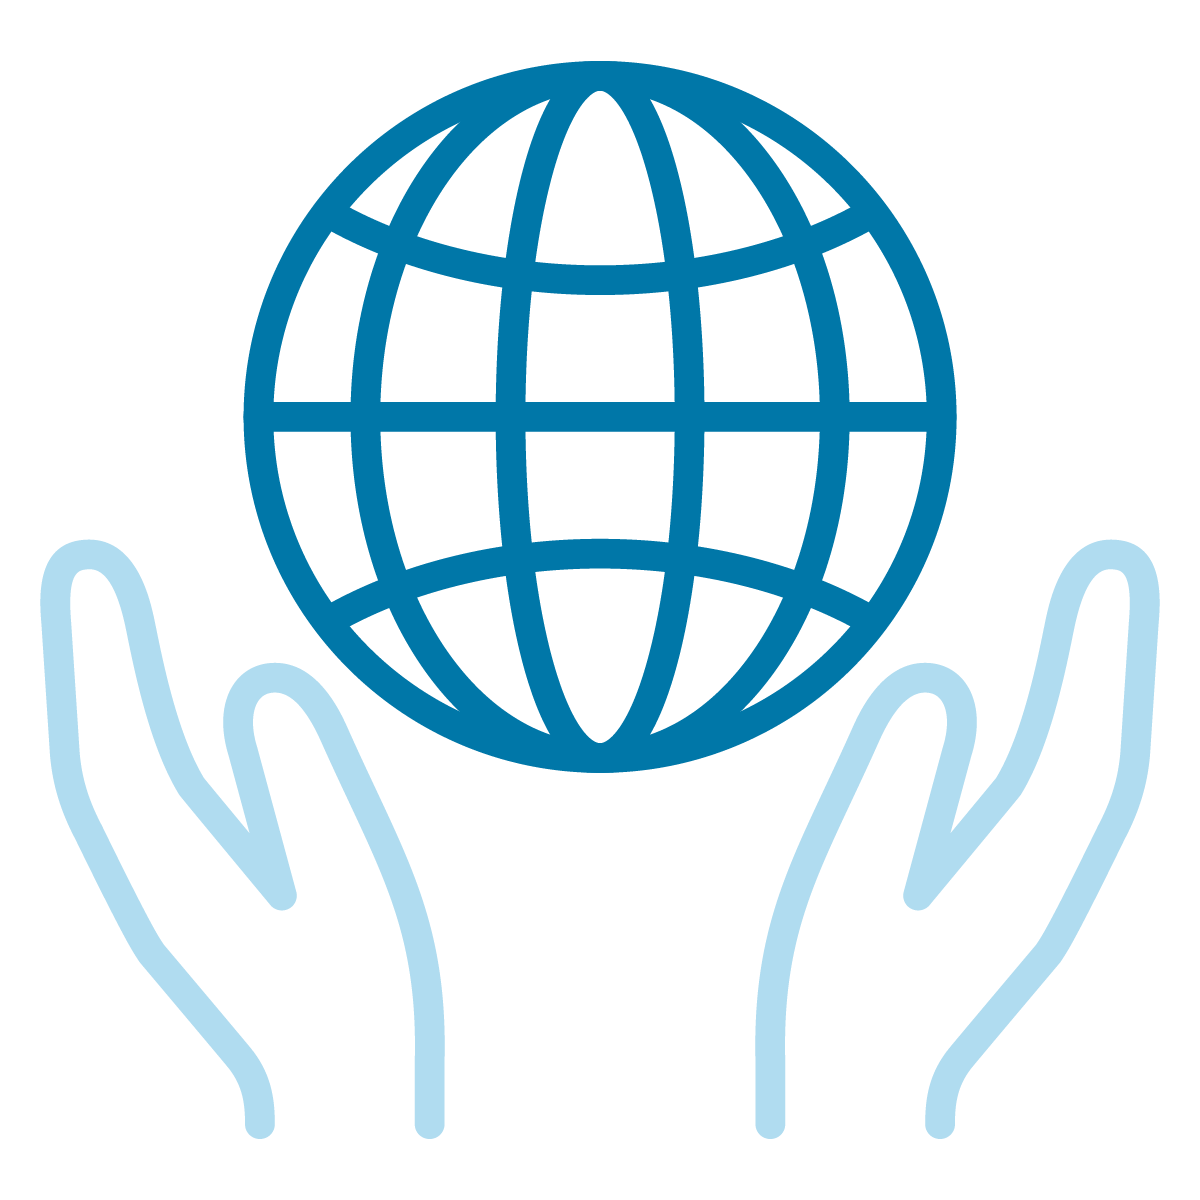 A pair of hands holding a blue globe on a white background